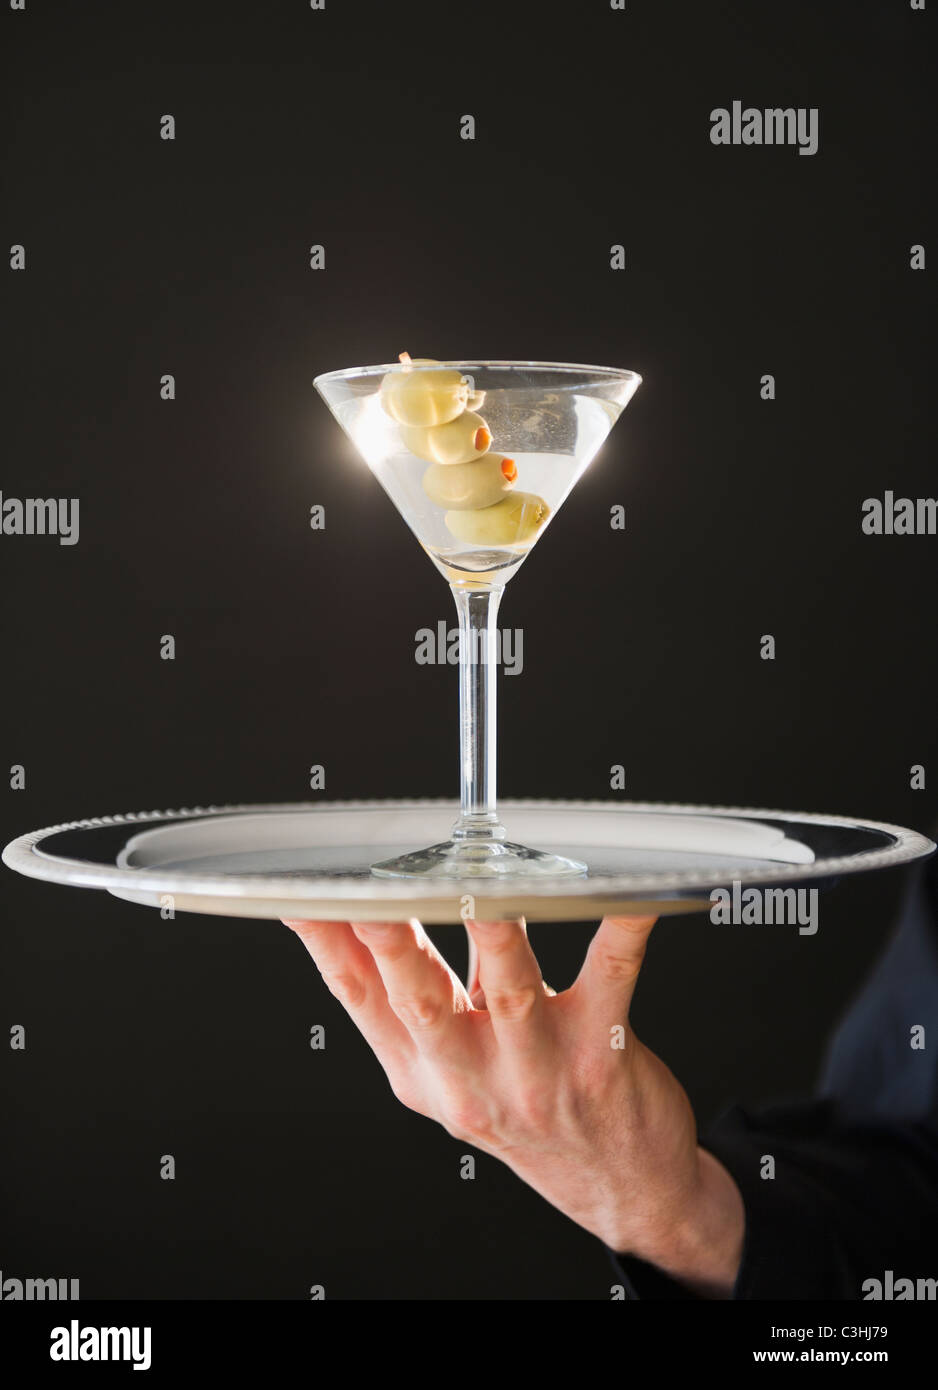 Hand holding tray with martini Banque D'Images